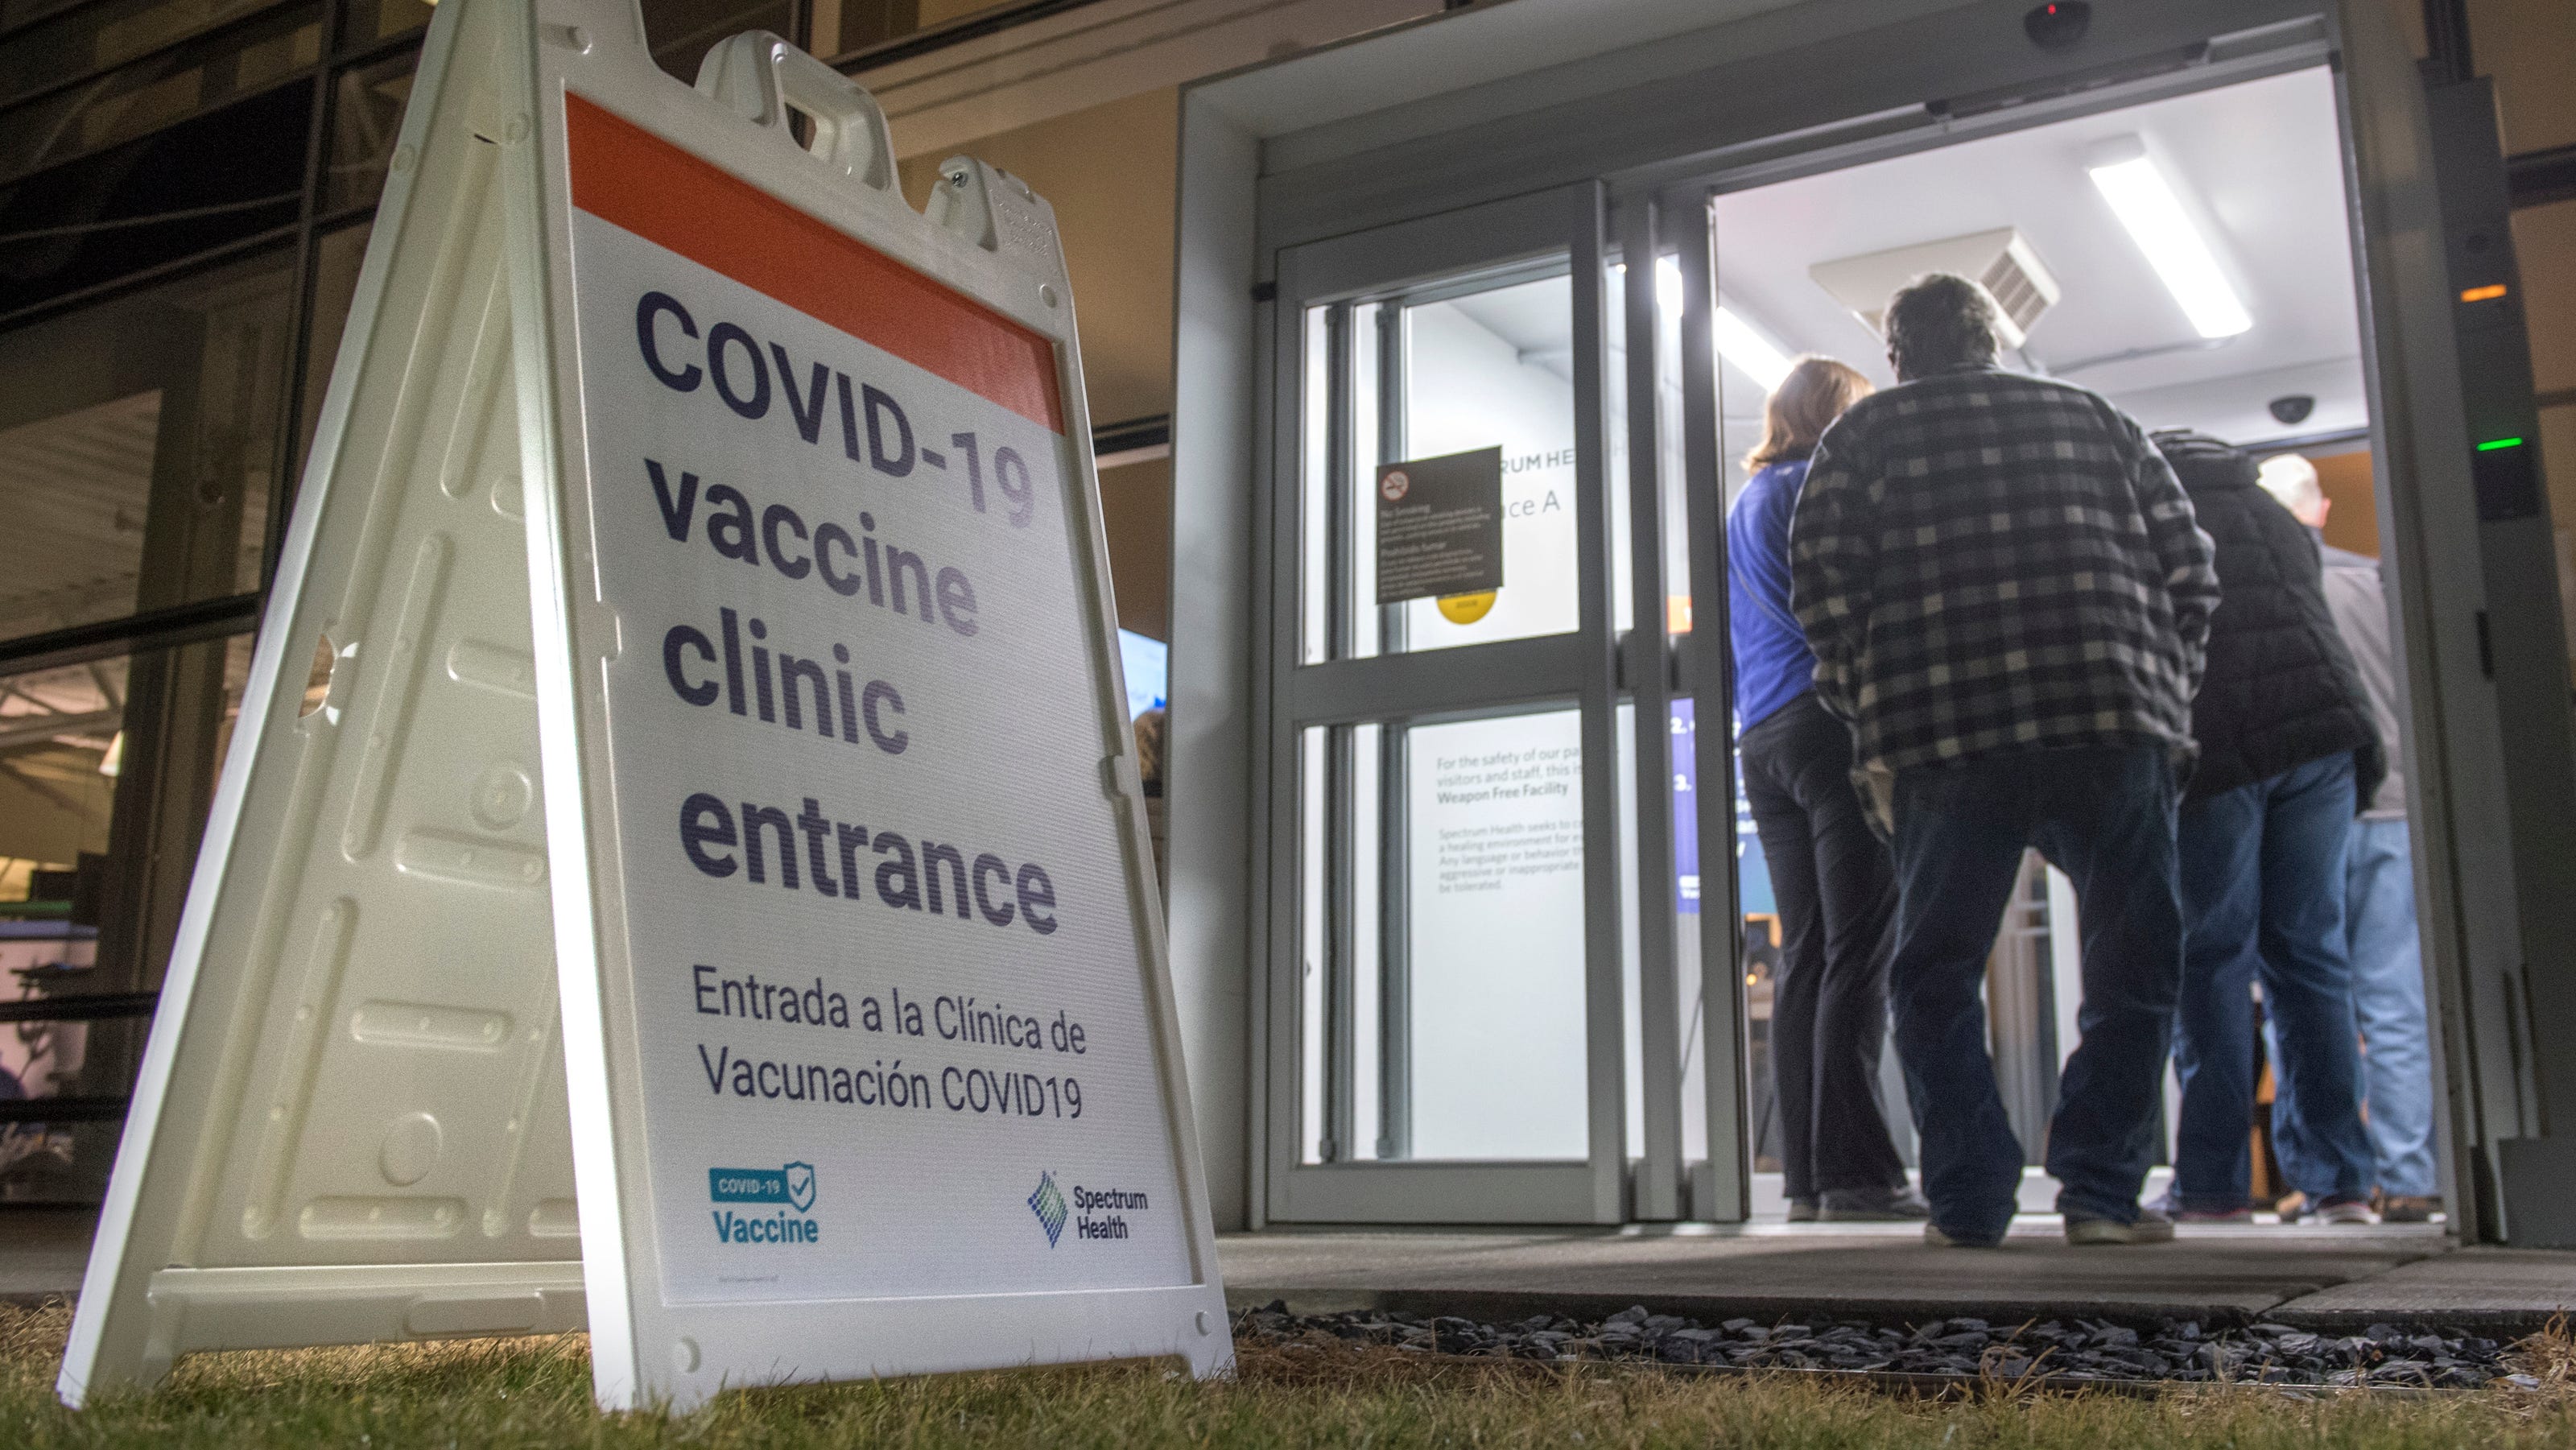 What to know about getting vaccinated for COVID-19 in Michigan